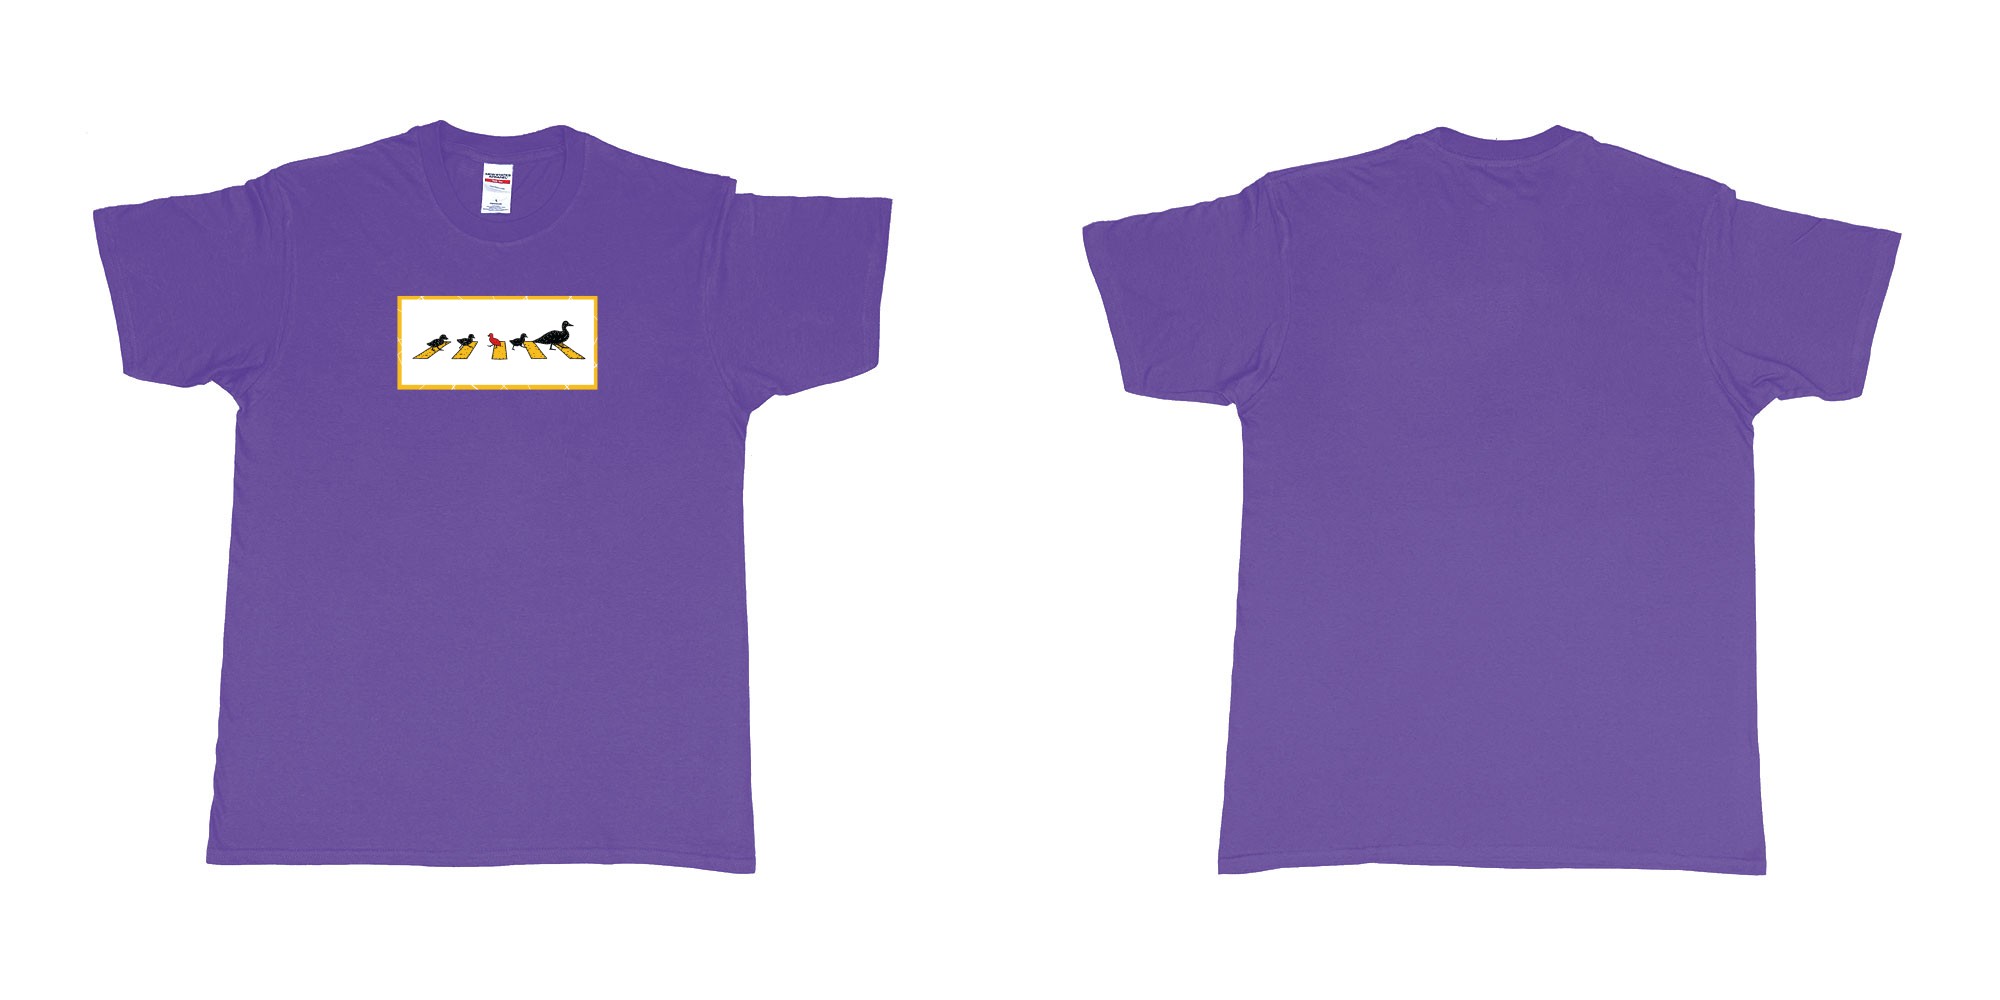 Custom tshirt design 4481 ducks in fabric color purple choice your own text made in Bali by The Pirate Way